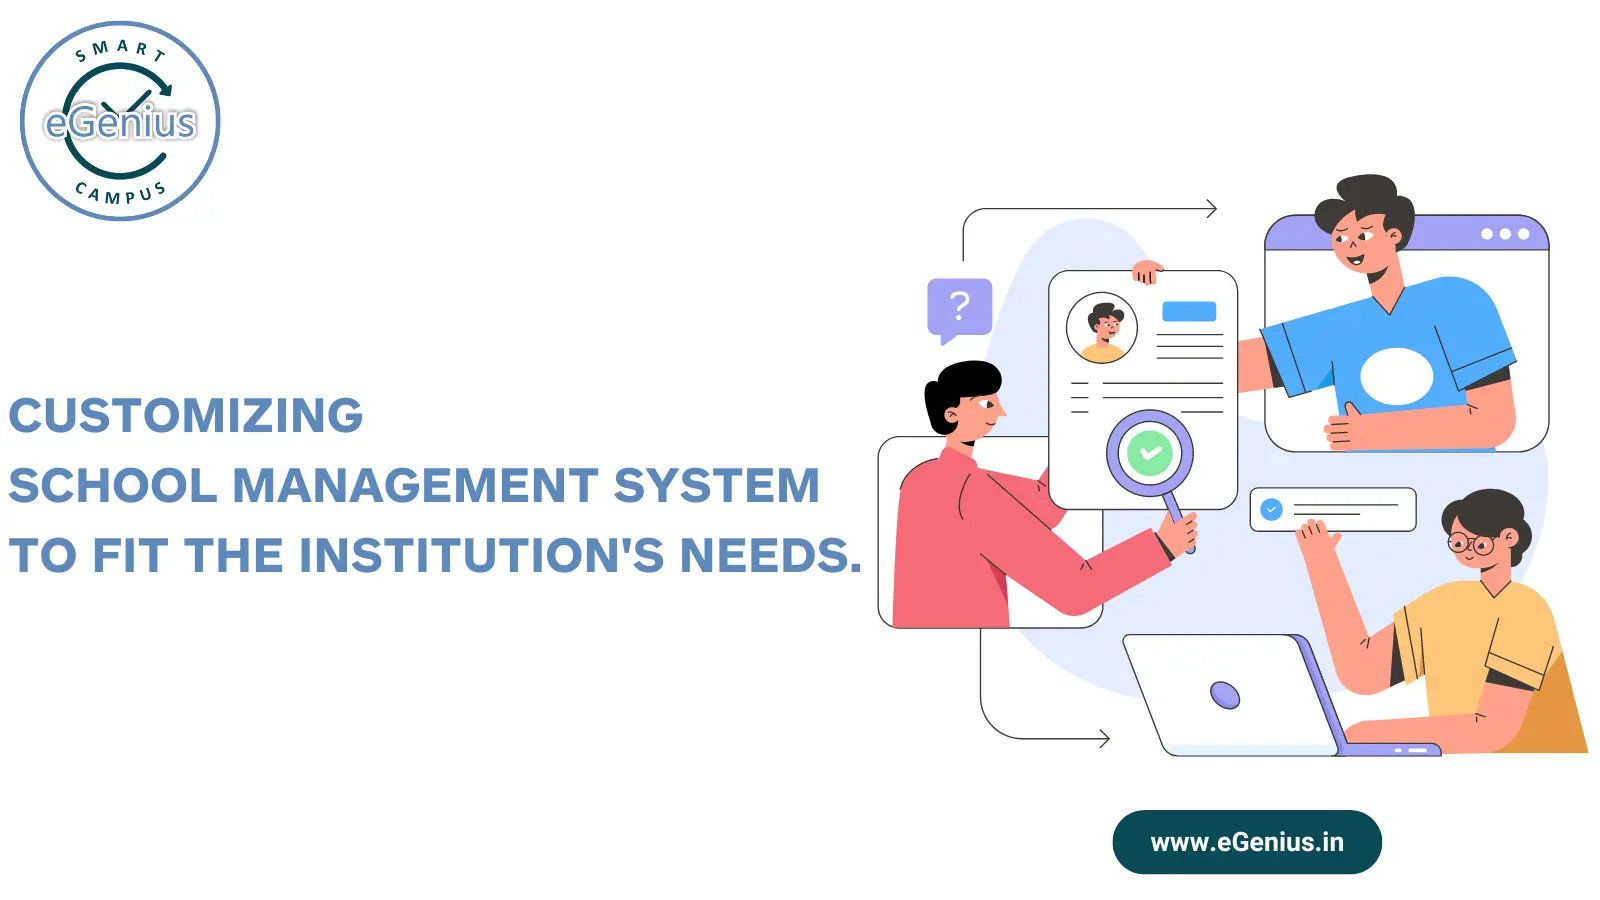 Customizing School Management System to Fit the Institution’s Needs